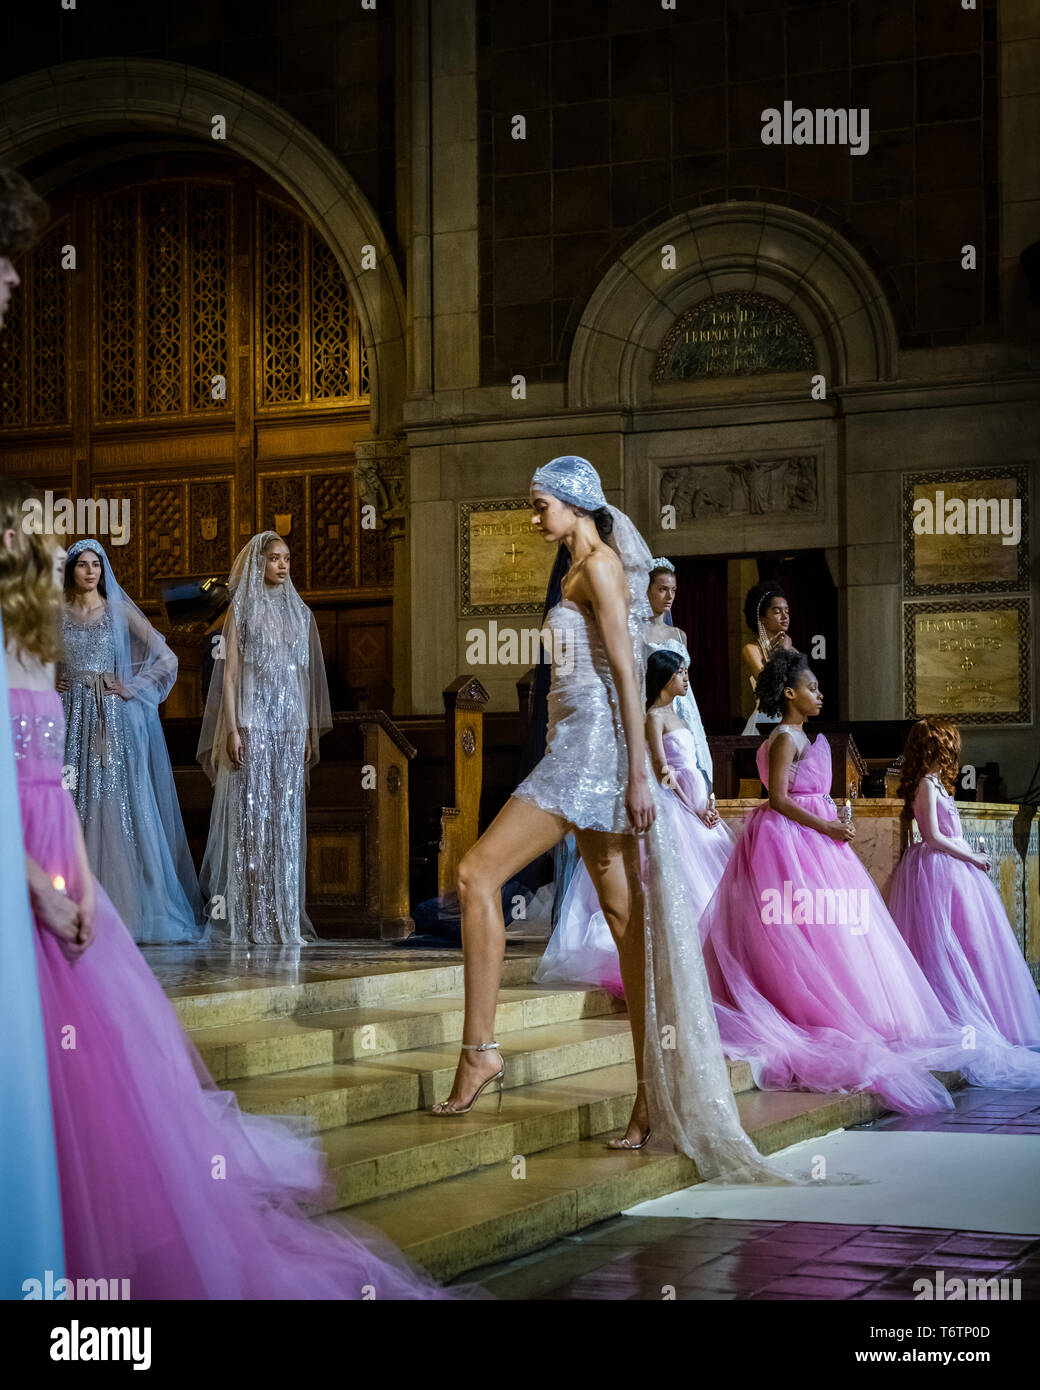 NEW YORK, NY - APRIL 11: A model walks the runway  during the Reem Acra Bridal Spring 2020 collection on April 11, 2019 in New York, NY. Stock Photo